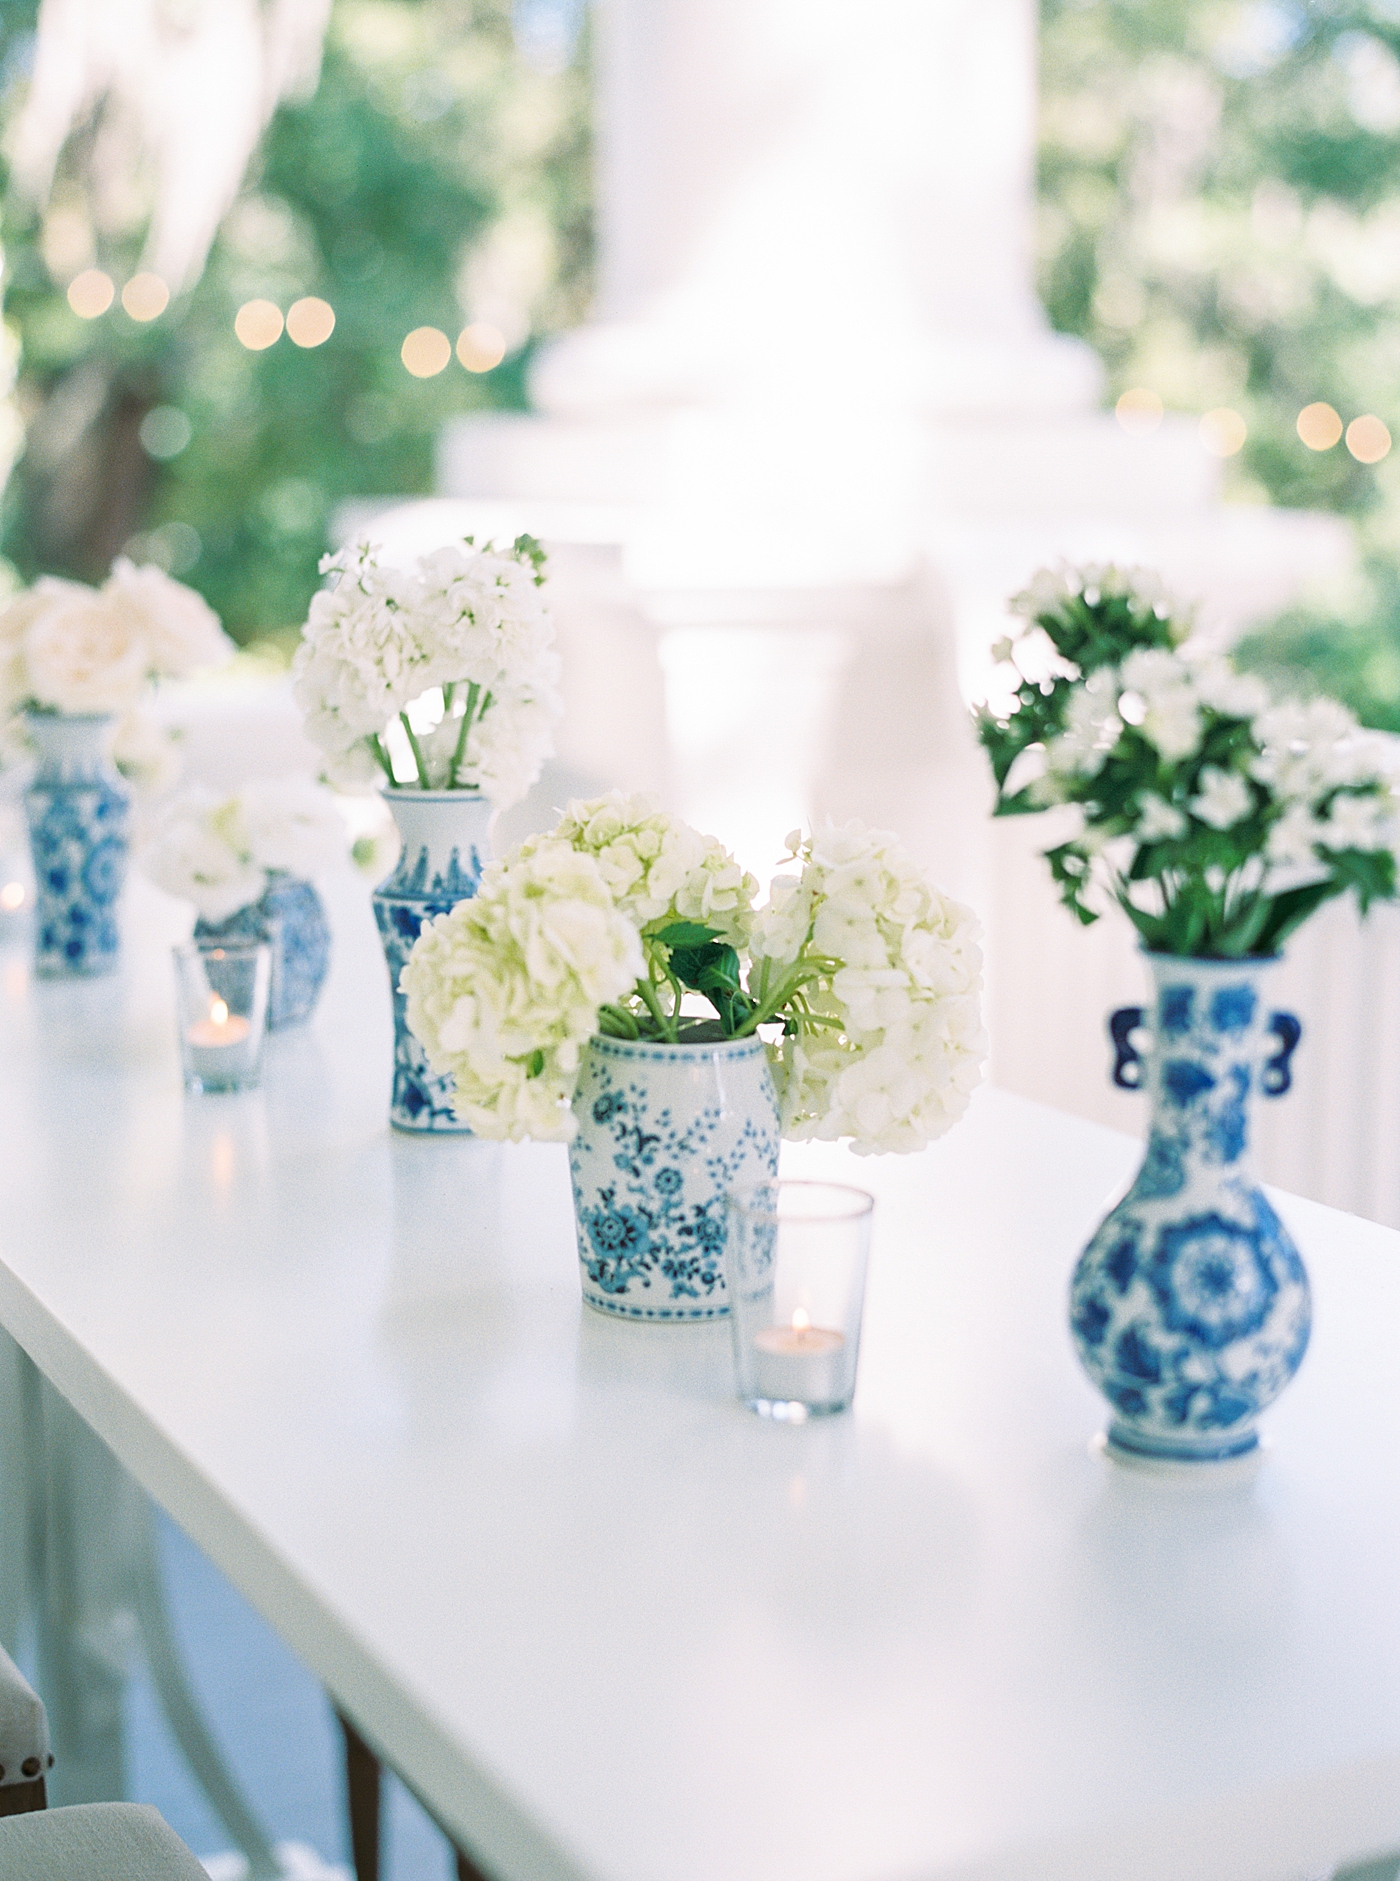 Table details with votives during their Elegant Grandmillenial Charleston Wedding | Images by Annie Laura Photography